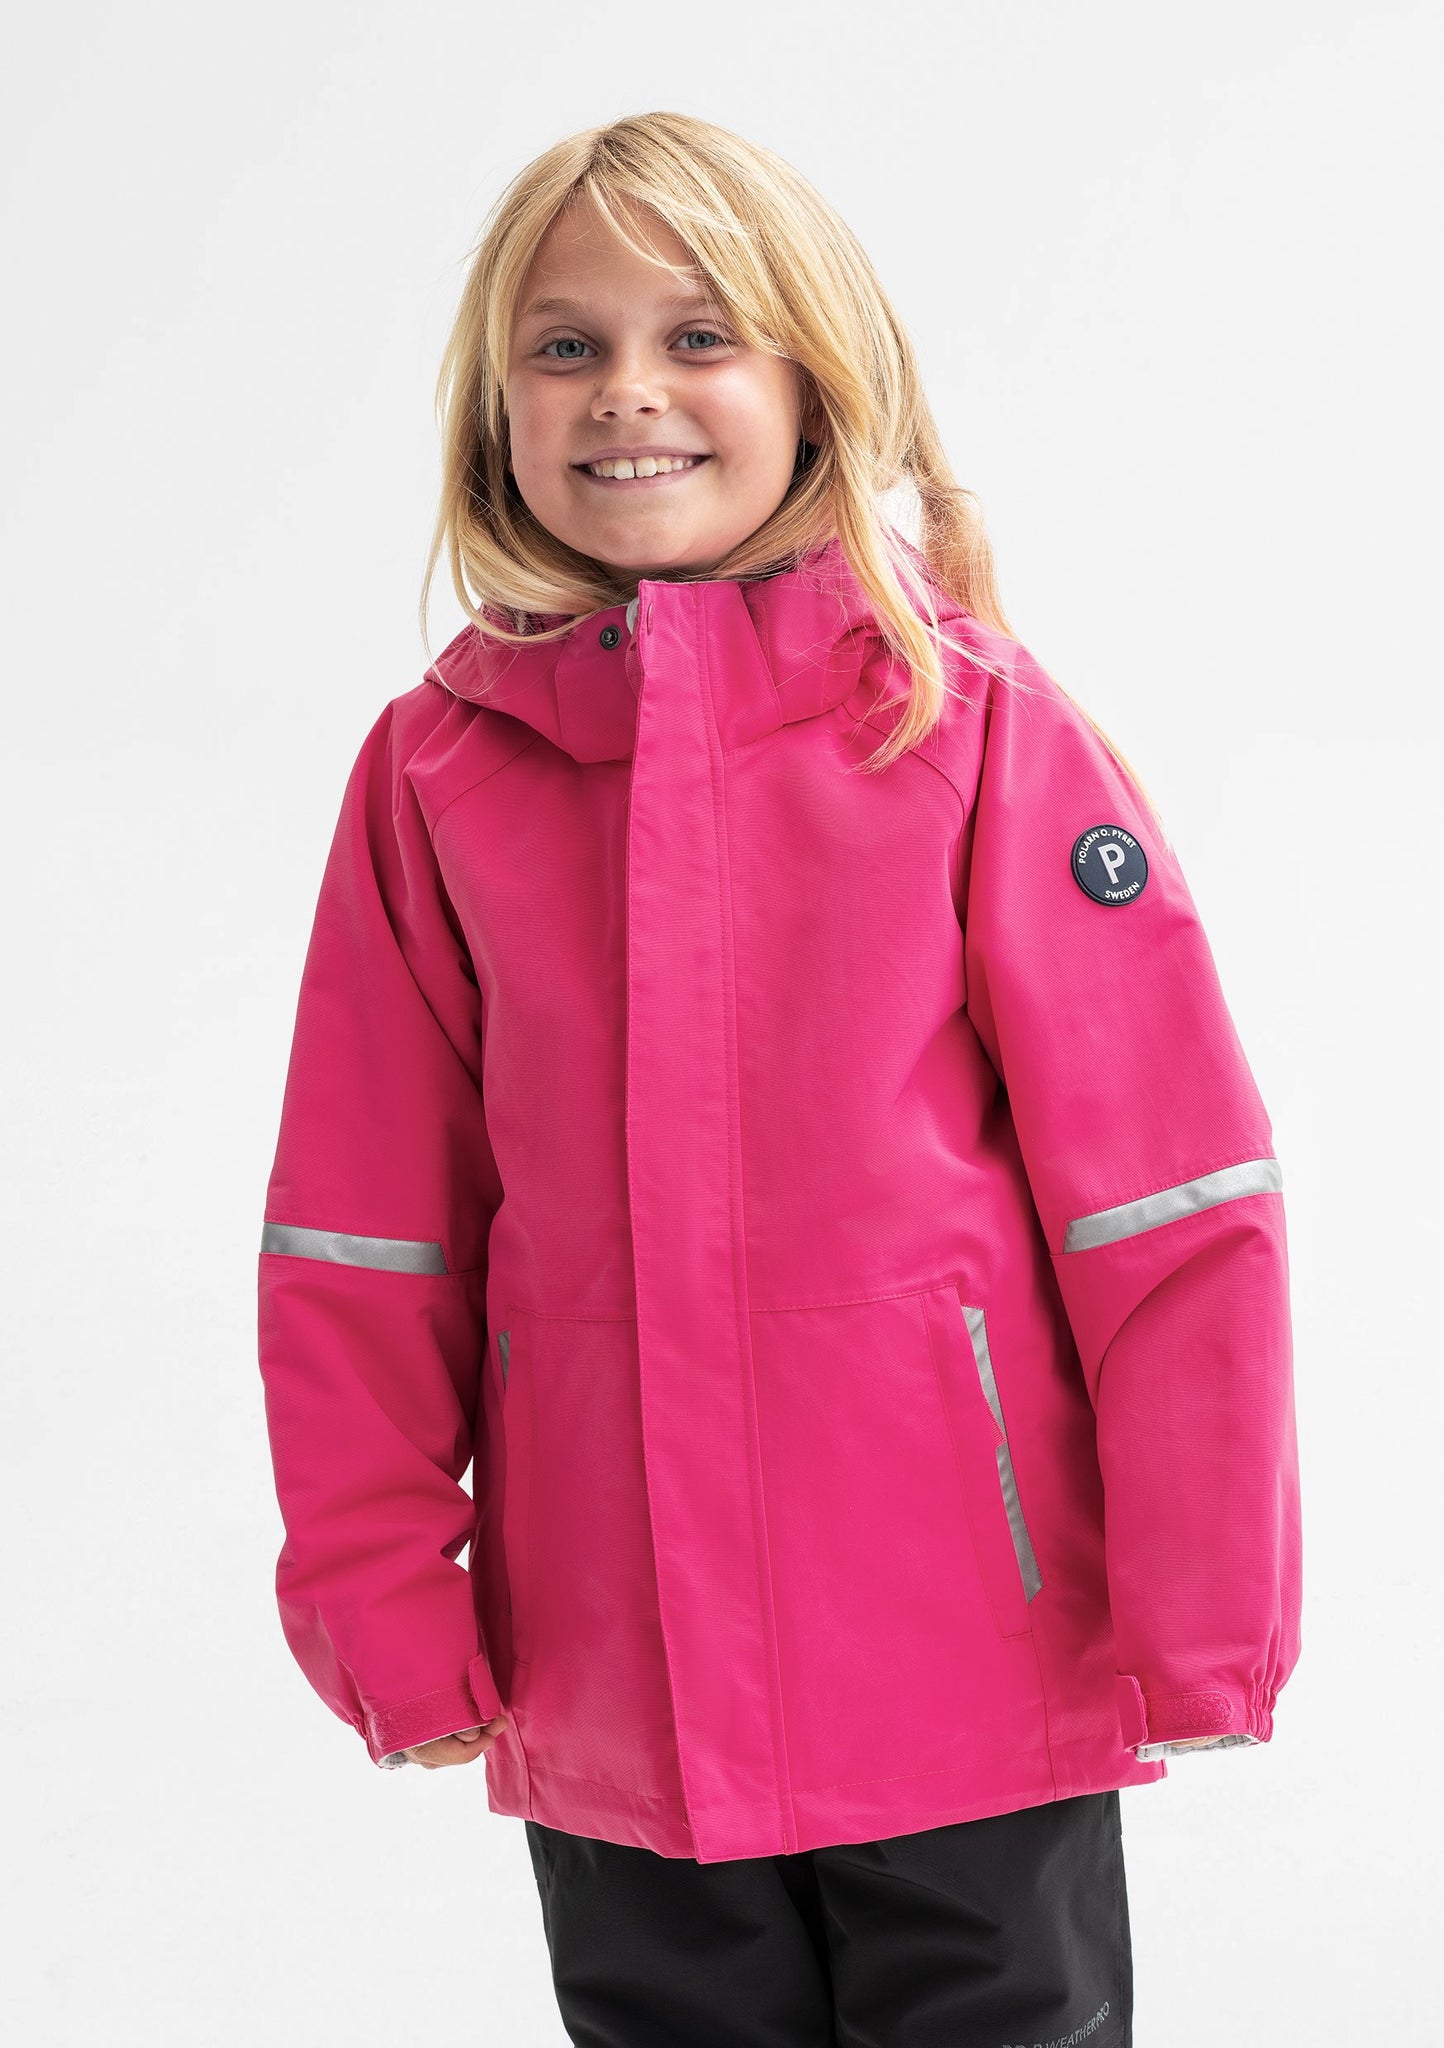 A young girl spotted wearing a pink, kids waterproof soft shell jacket, comes with reflectors, and detachable hood.